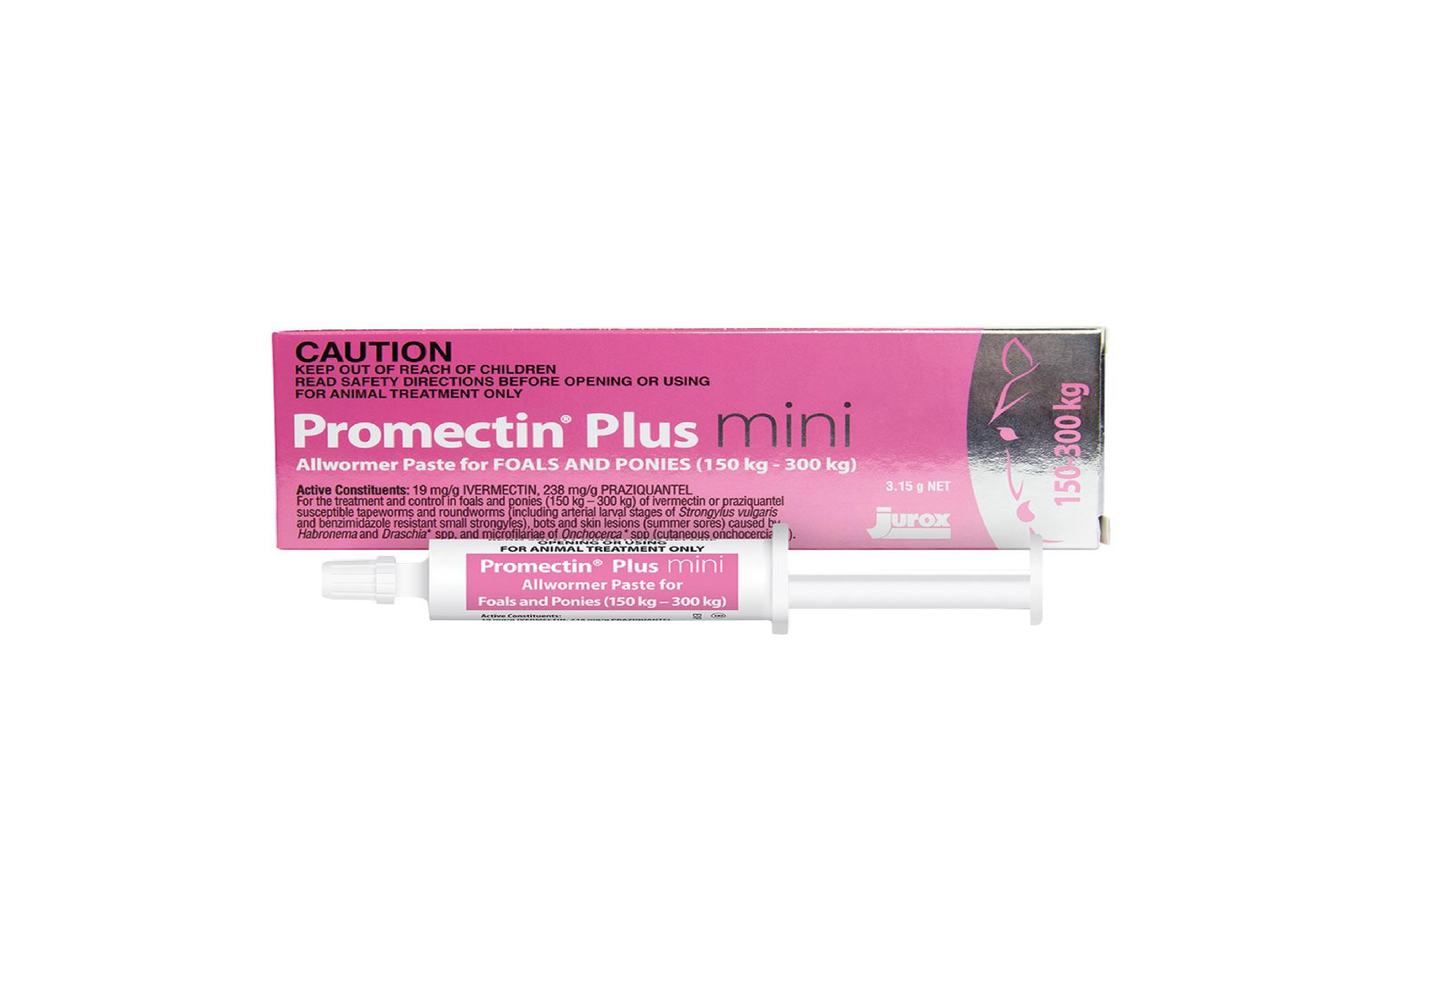 Promectin Plus Mini Allwormer Foals and Ponies